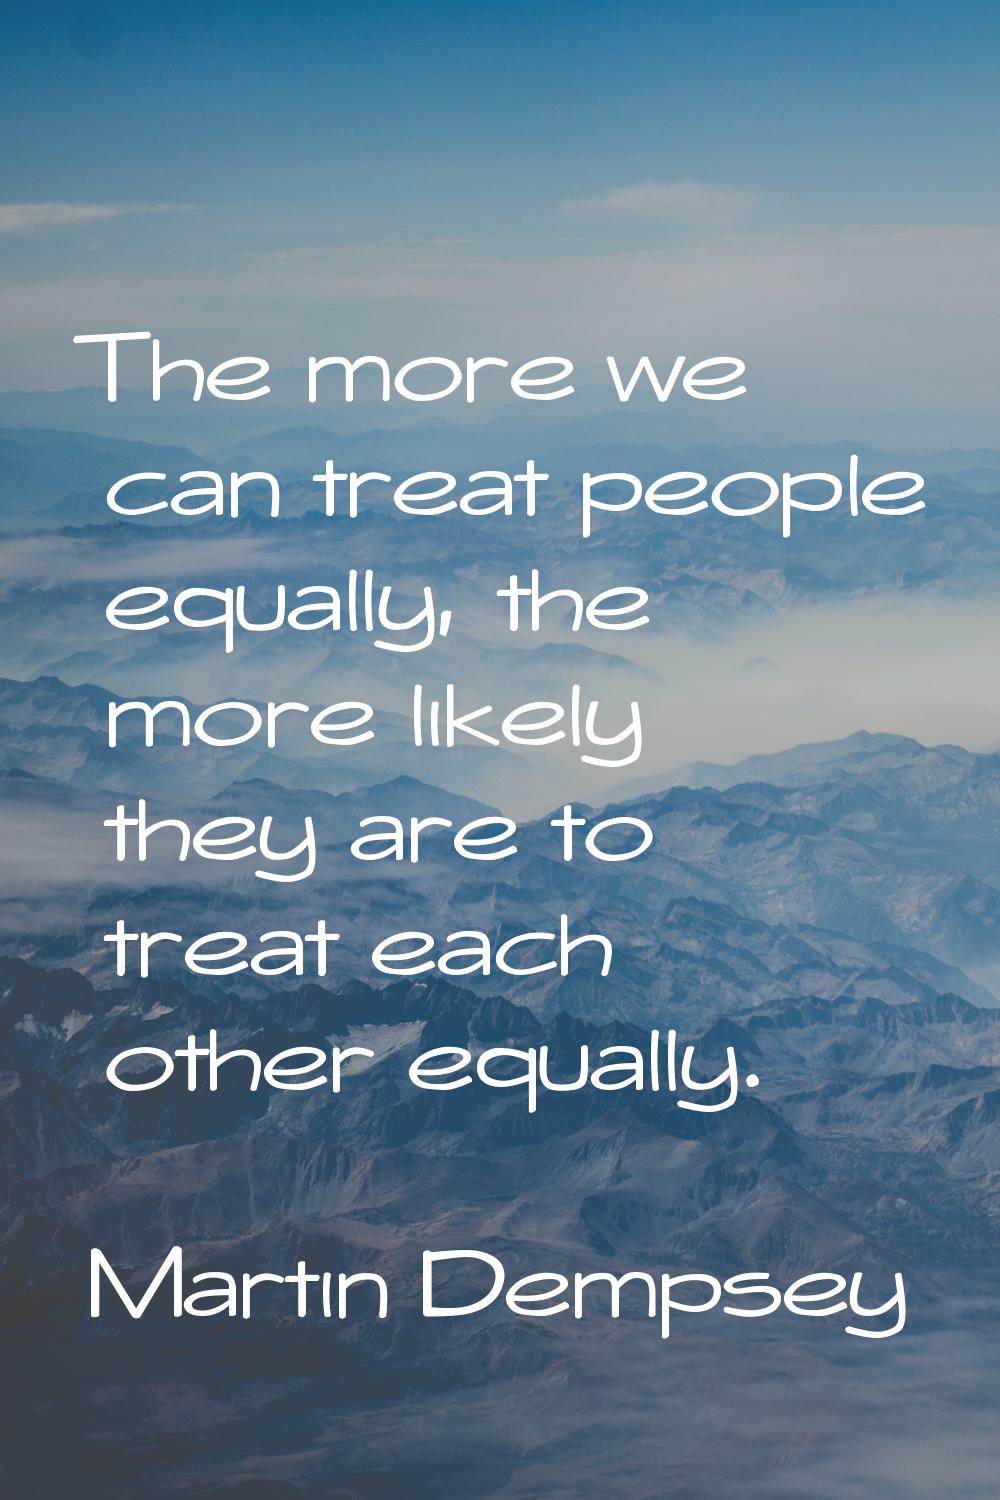 The more we can treat people equally, the more likely they are to treat each other equally.